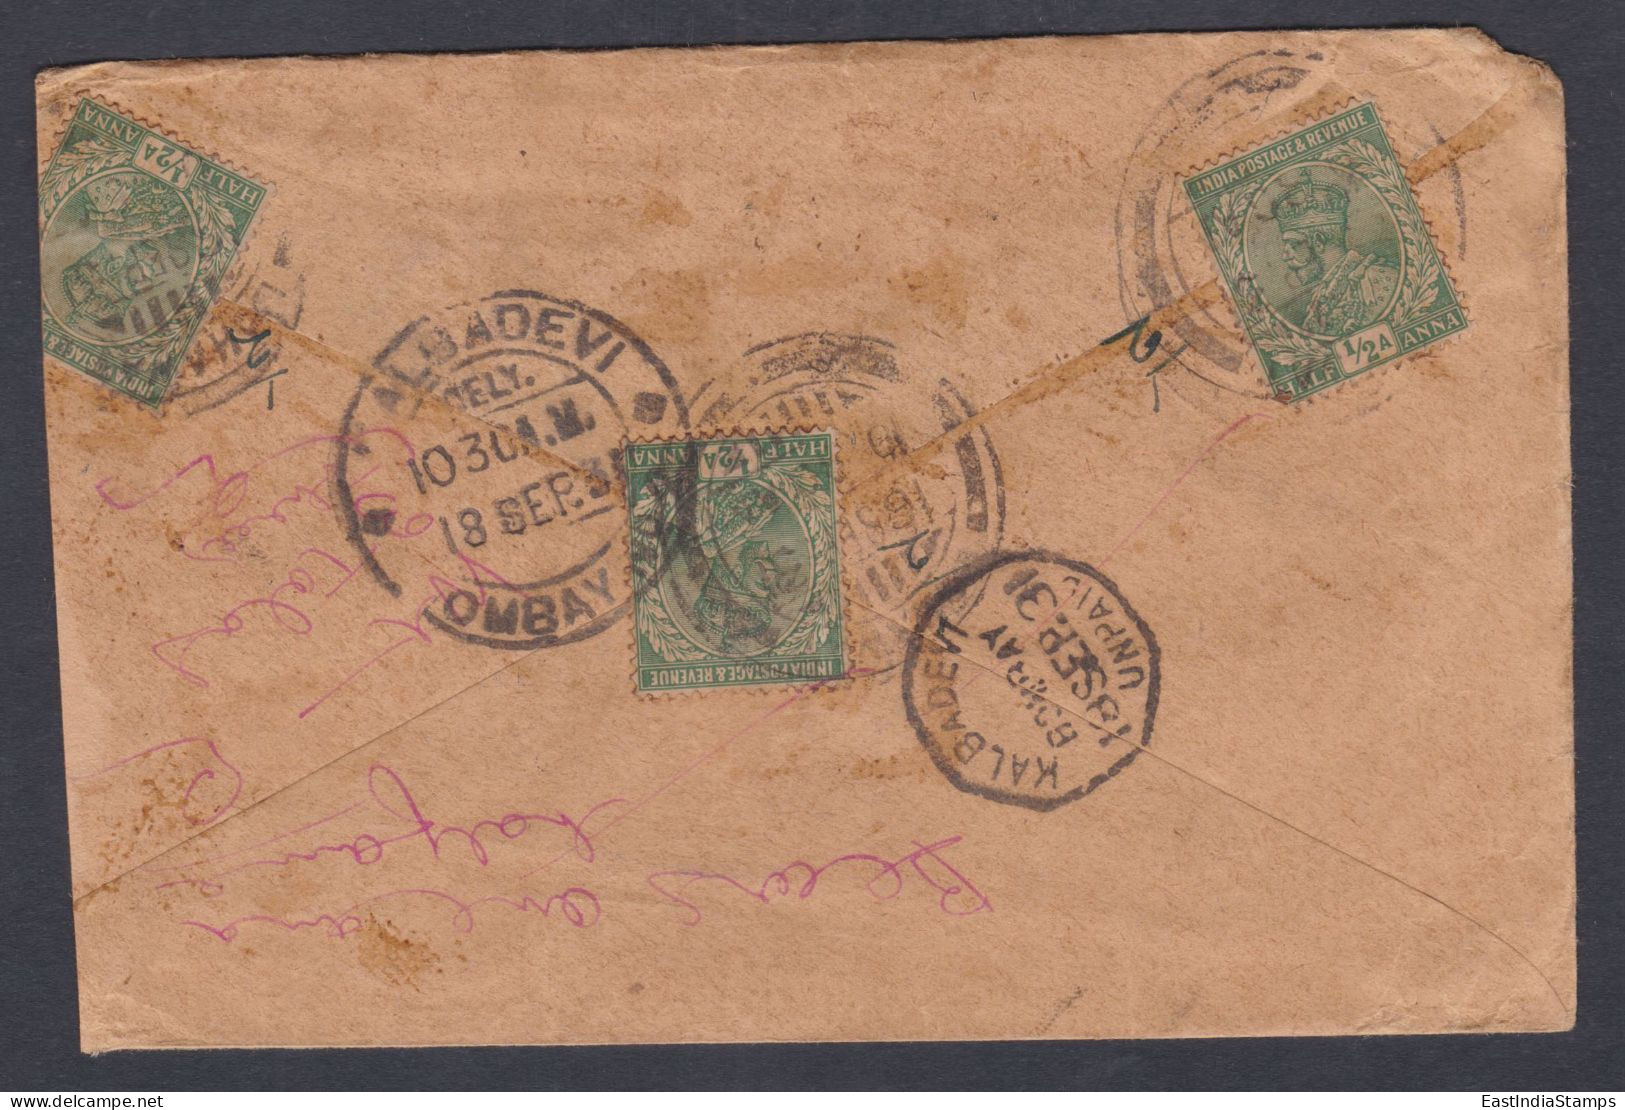 Inde British India 1931 Used Postage Due Cover, To Bombay, King George V Stamp - 1911-35 King George V